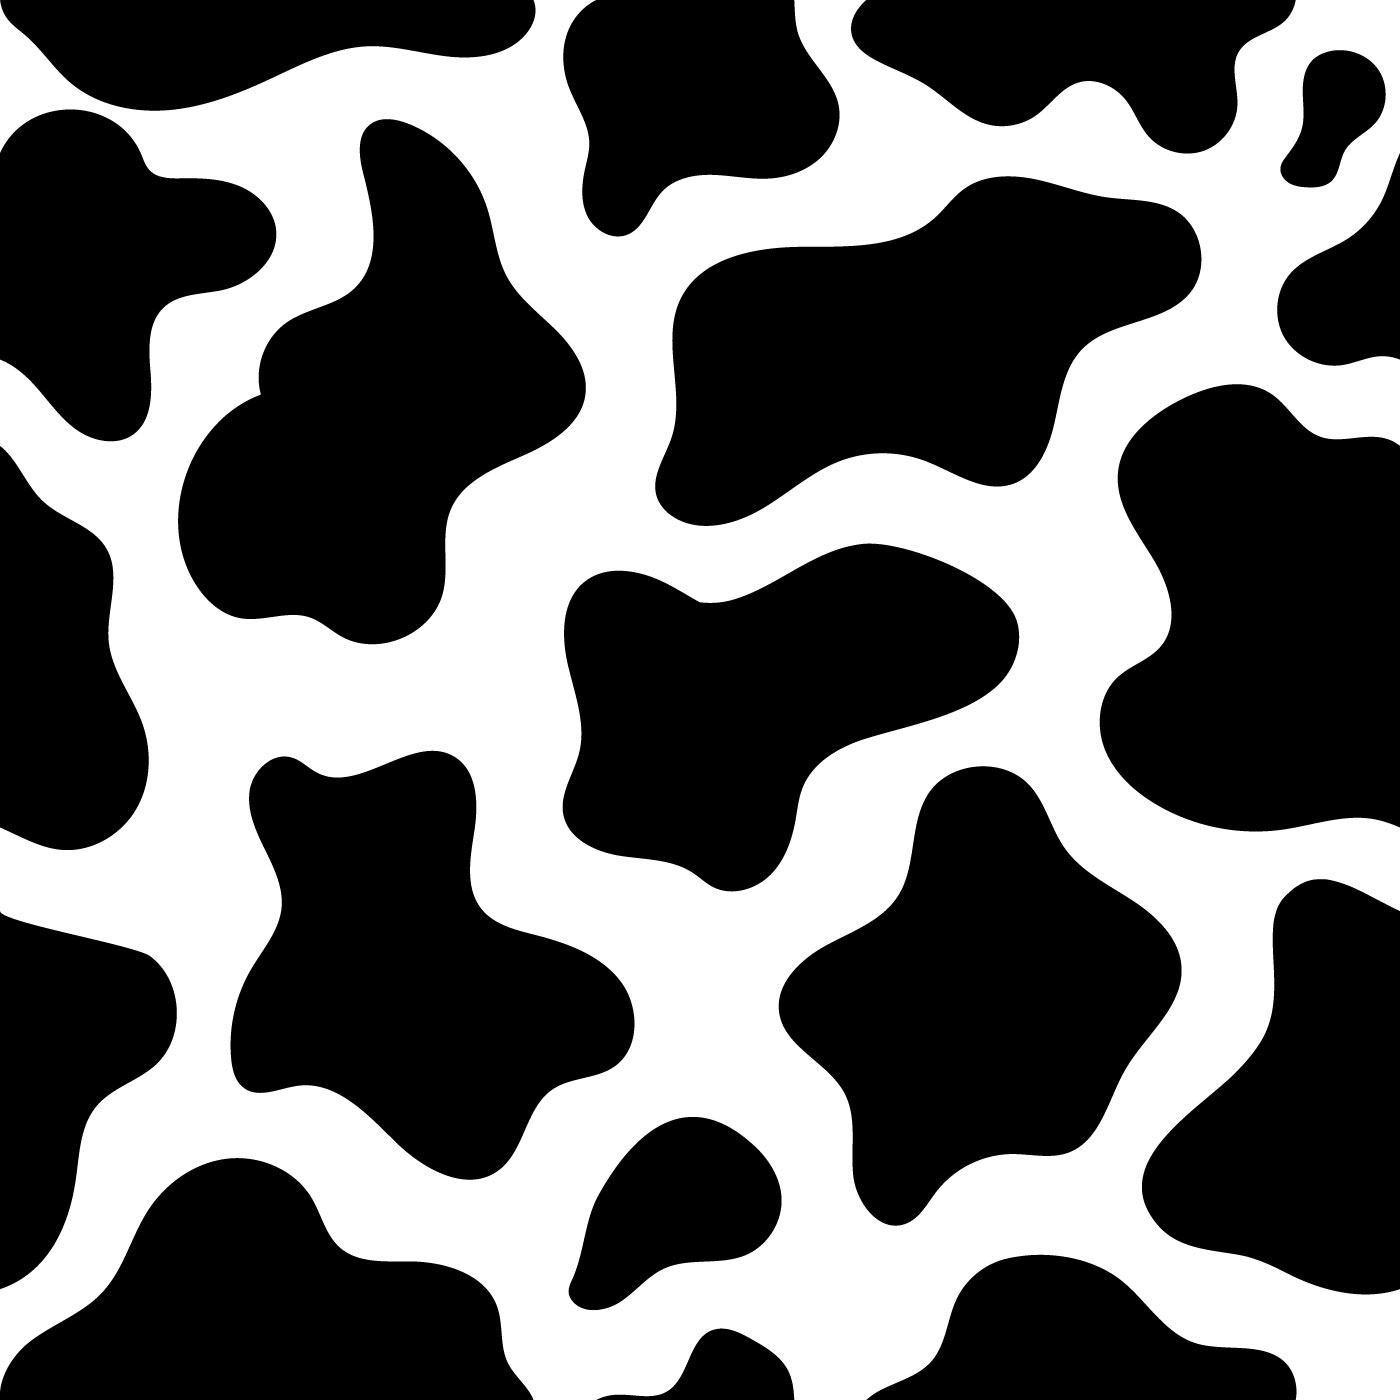 Cow Print Seamless Pattern - Download Free Vectors ...